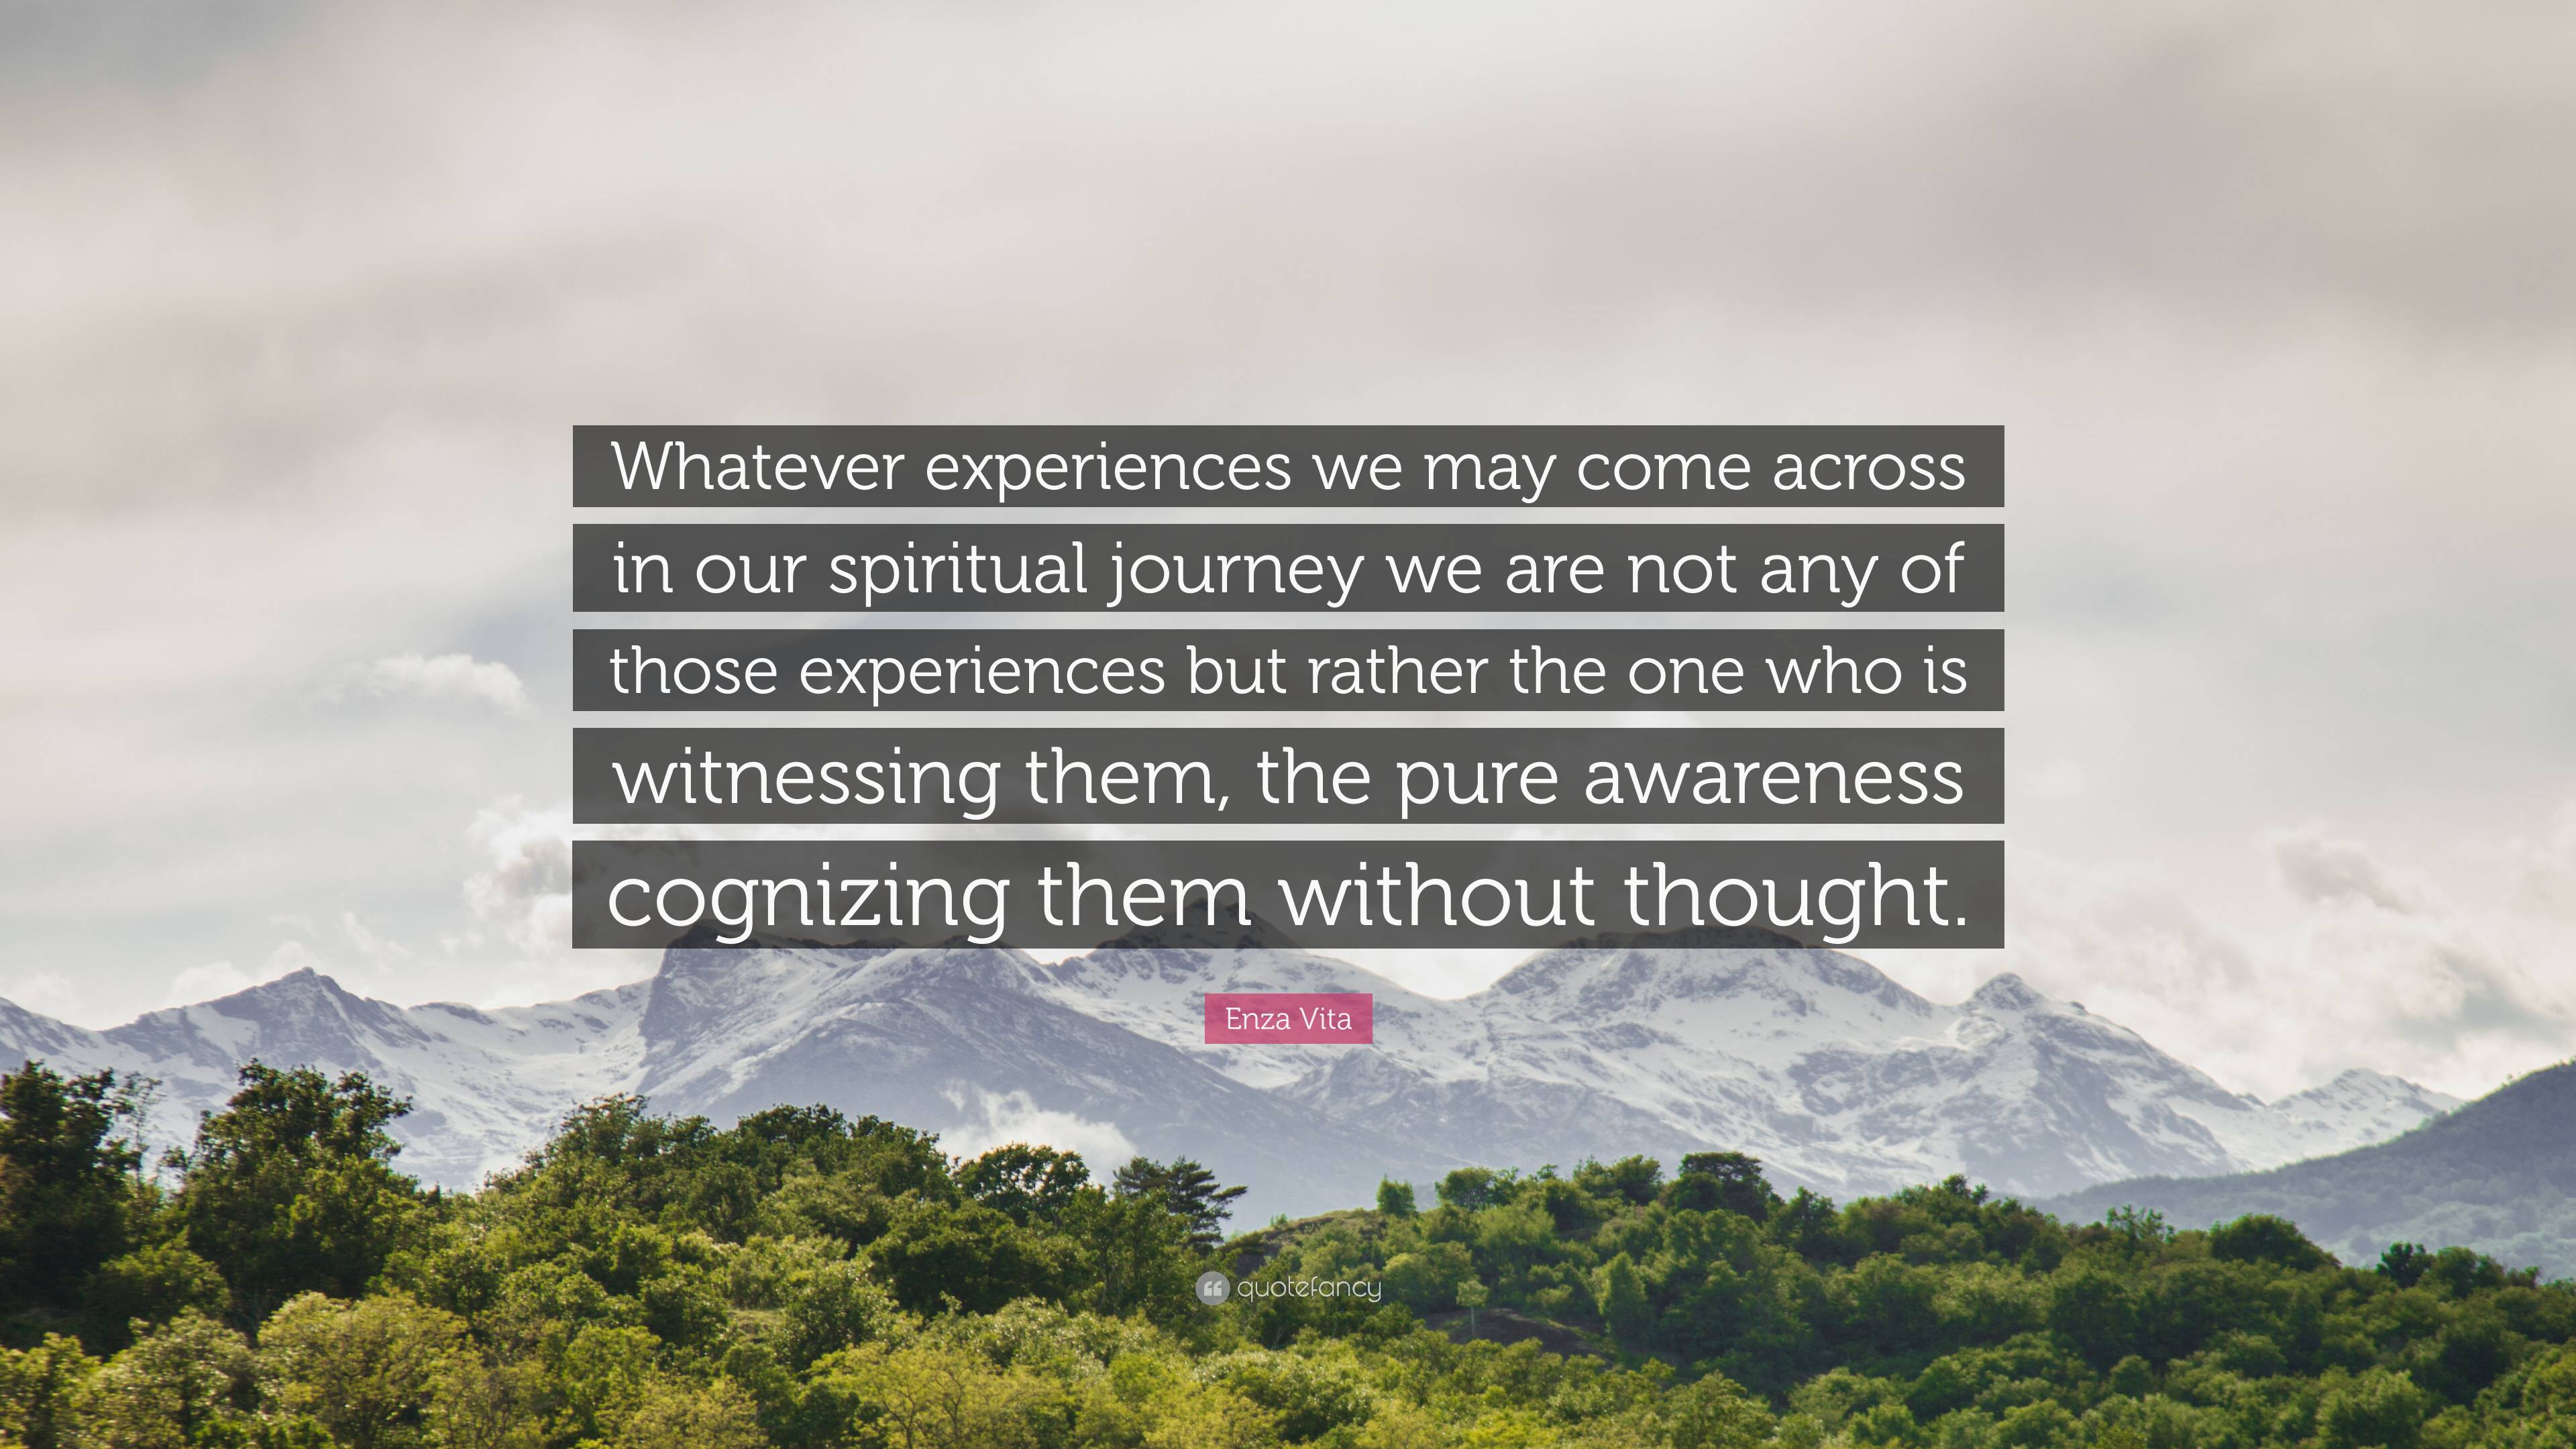 Enza Vita Quote: “Whatever experiences we may come across in our ...